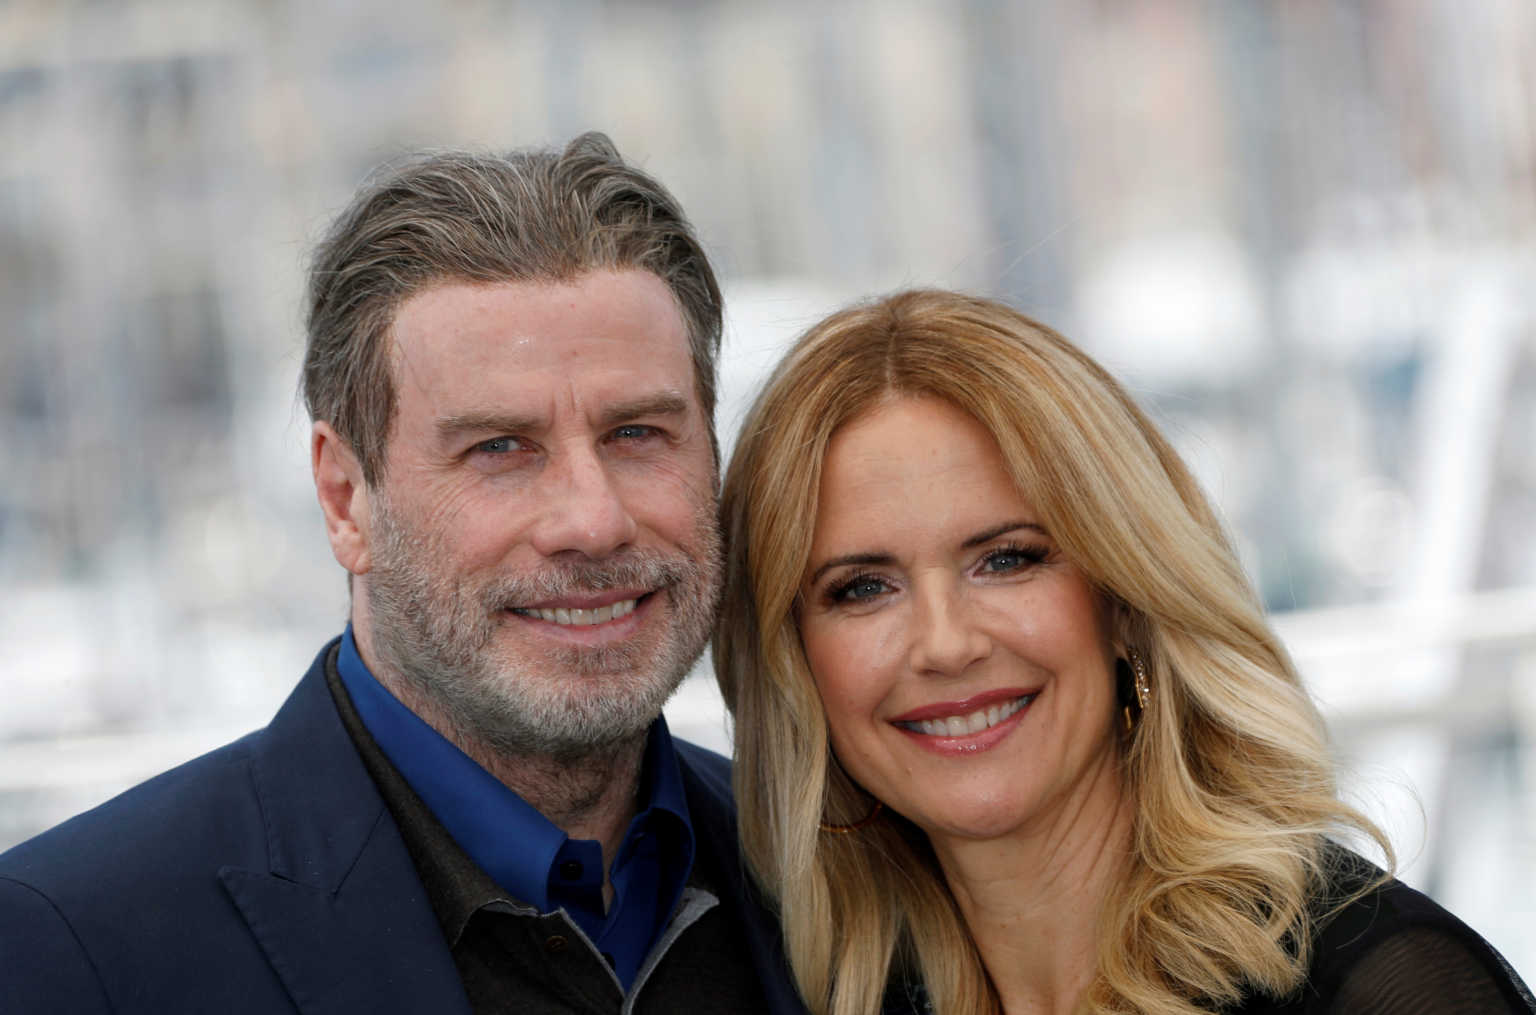 FILE PHOTO: 71st Cannes Film Festival - Photocall for the film Gotti - Cannes, France, May 15, 2018. Cast members John Travolta and Kelly Preston. REUTERS/Eric Gaillard/File Photo